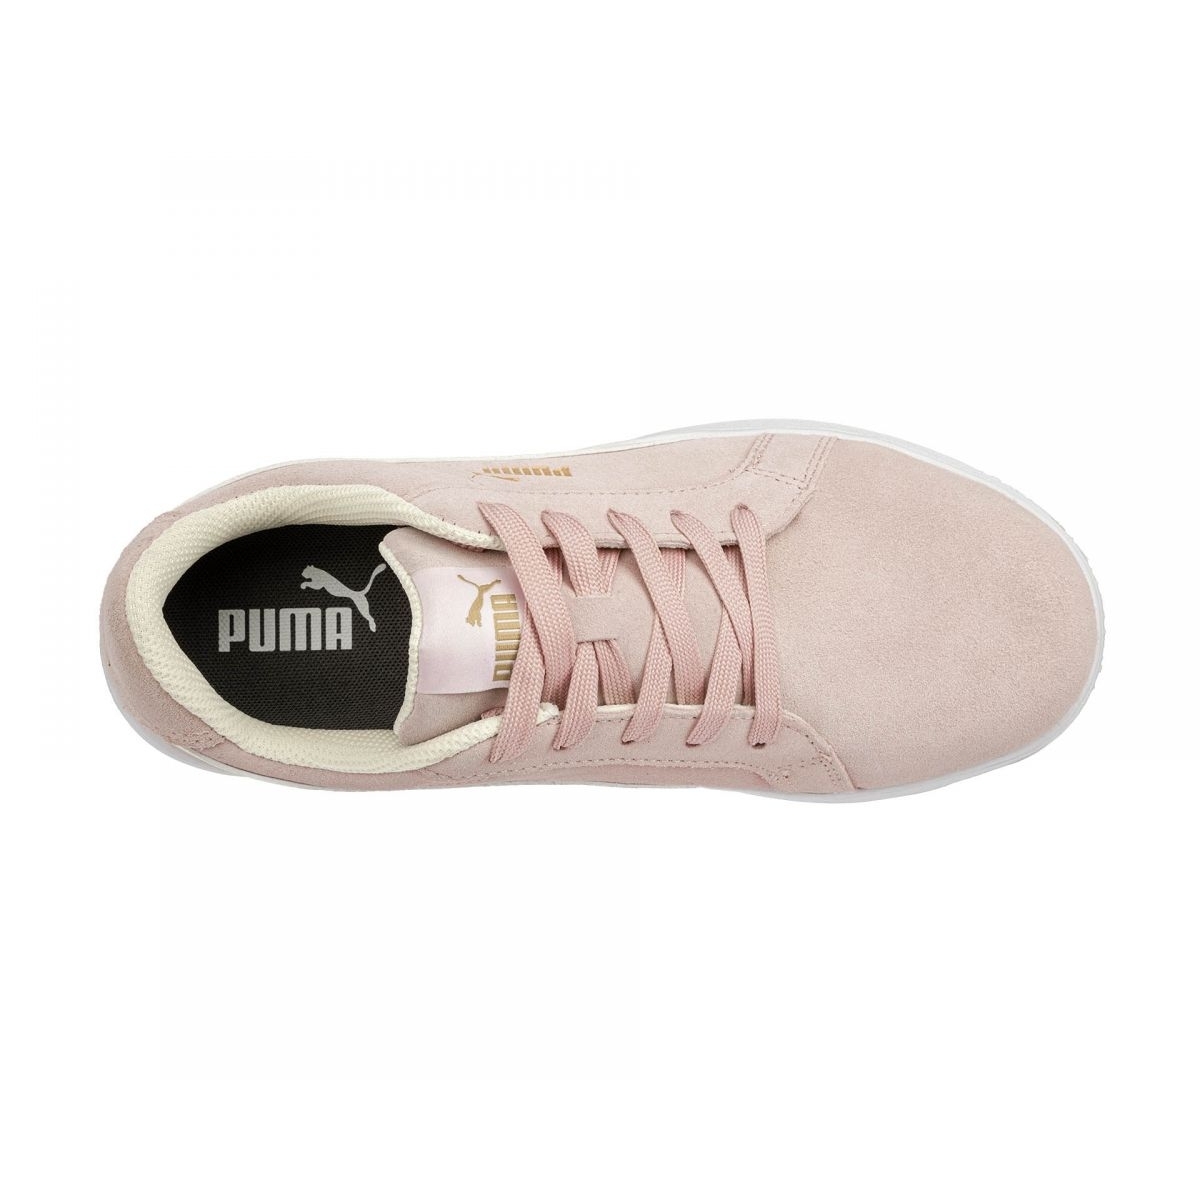 PUMA Safety Women's Iconic Low Composite Toe EH Work Shoes Pink Suede - 640145 PINK - PINK, 8